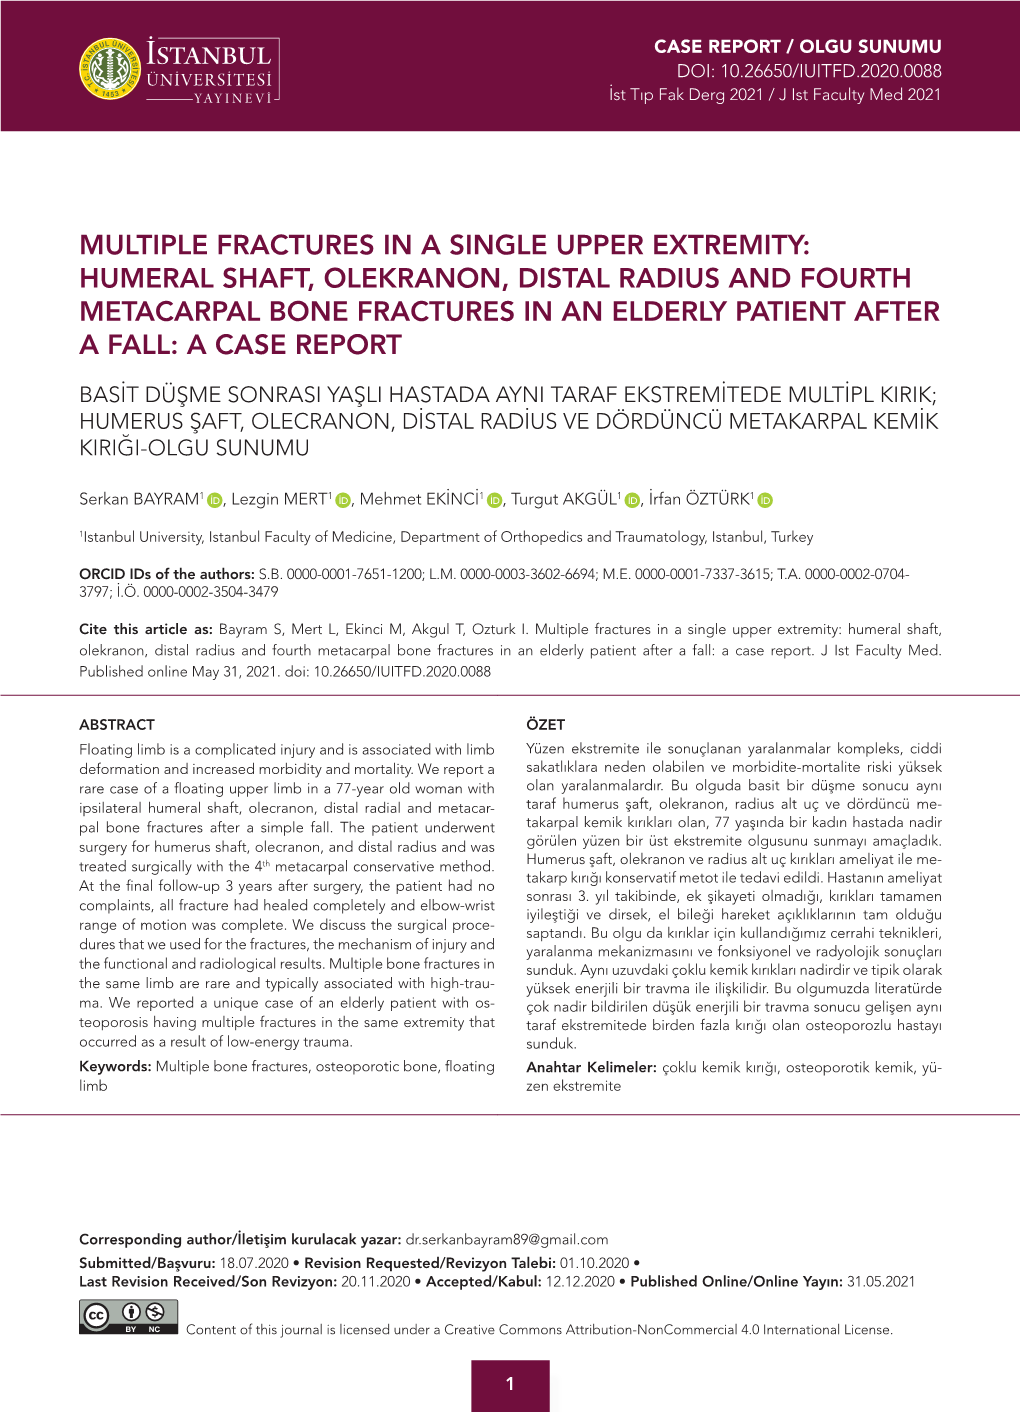 Humeral Shaft, Olekranon, Distal Radius and Fourth Metacarpal Bone Fractures in an Elderly Patient After a Fall: a Case Report